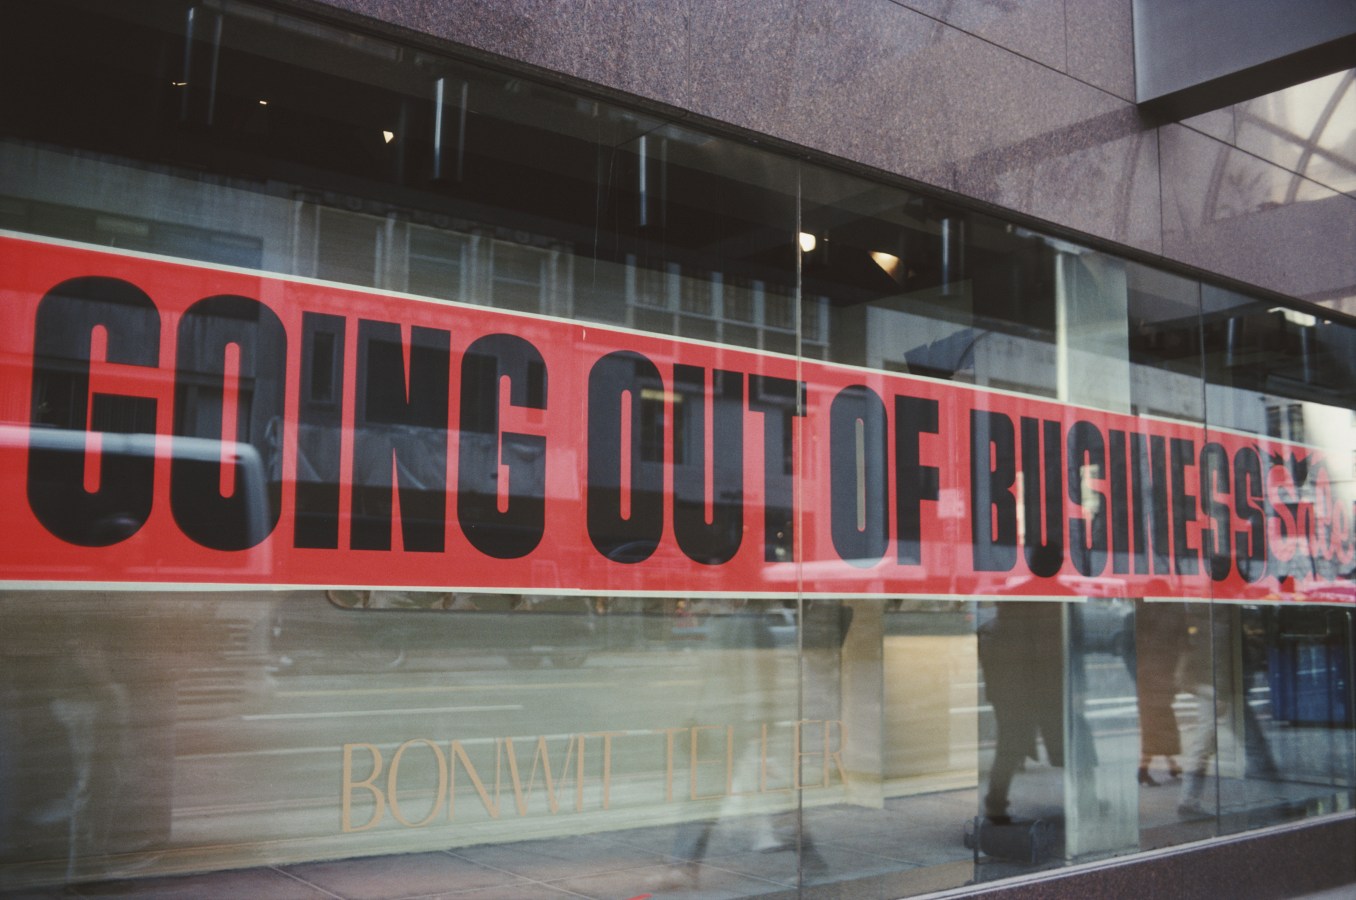 Shop front showing going out of business sign across window